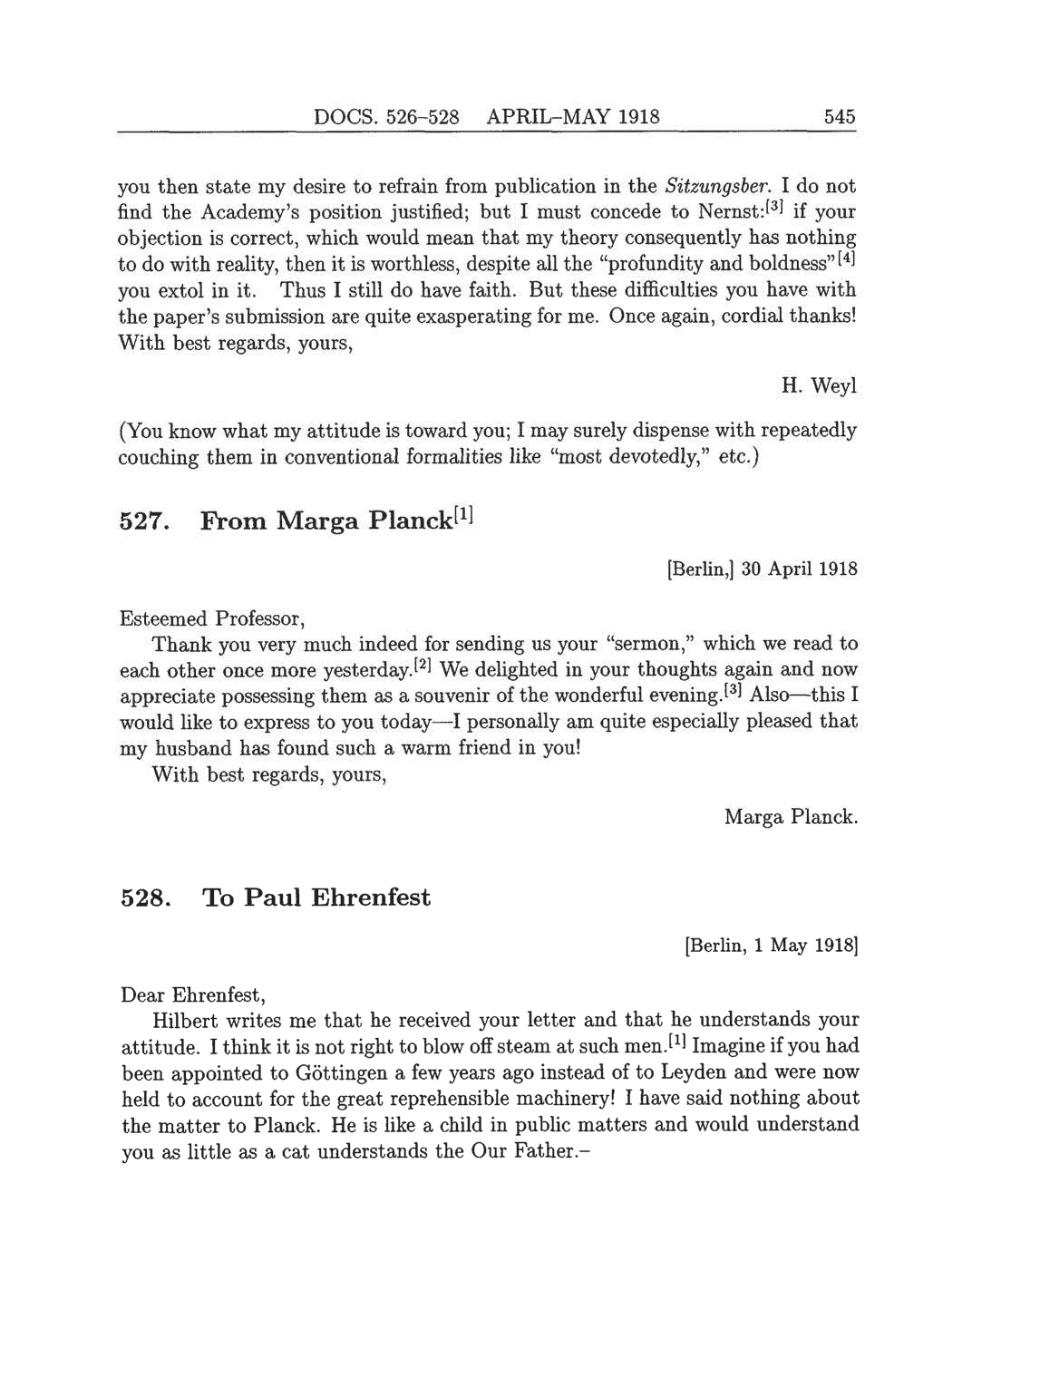 Volume 8: The Berlin Years: Correspondence, 1914-1918 (English translation supplement) page 545